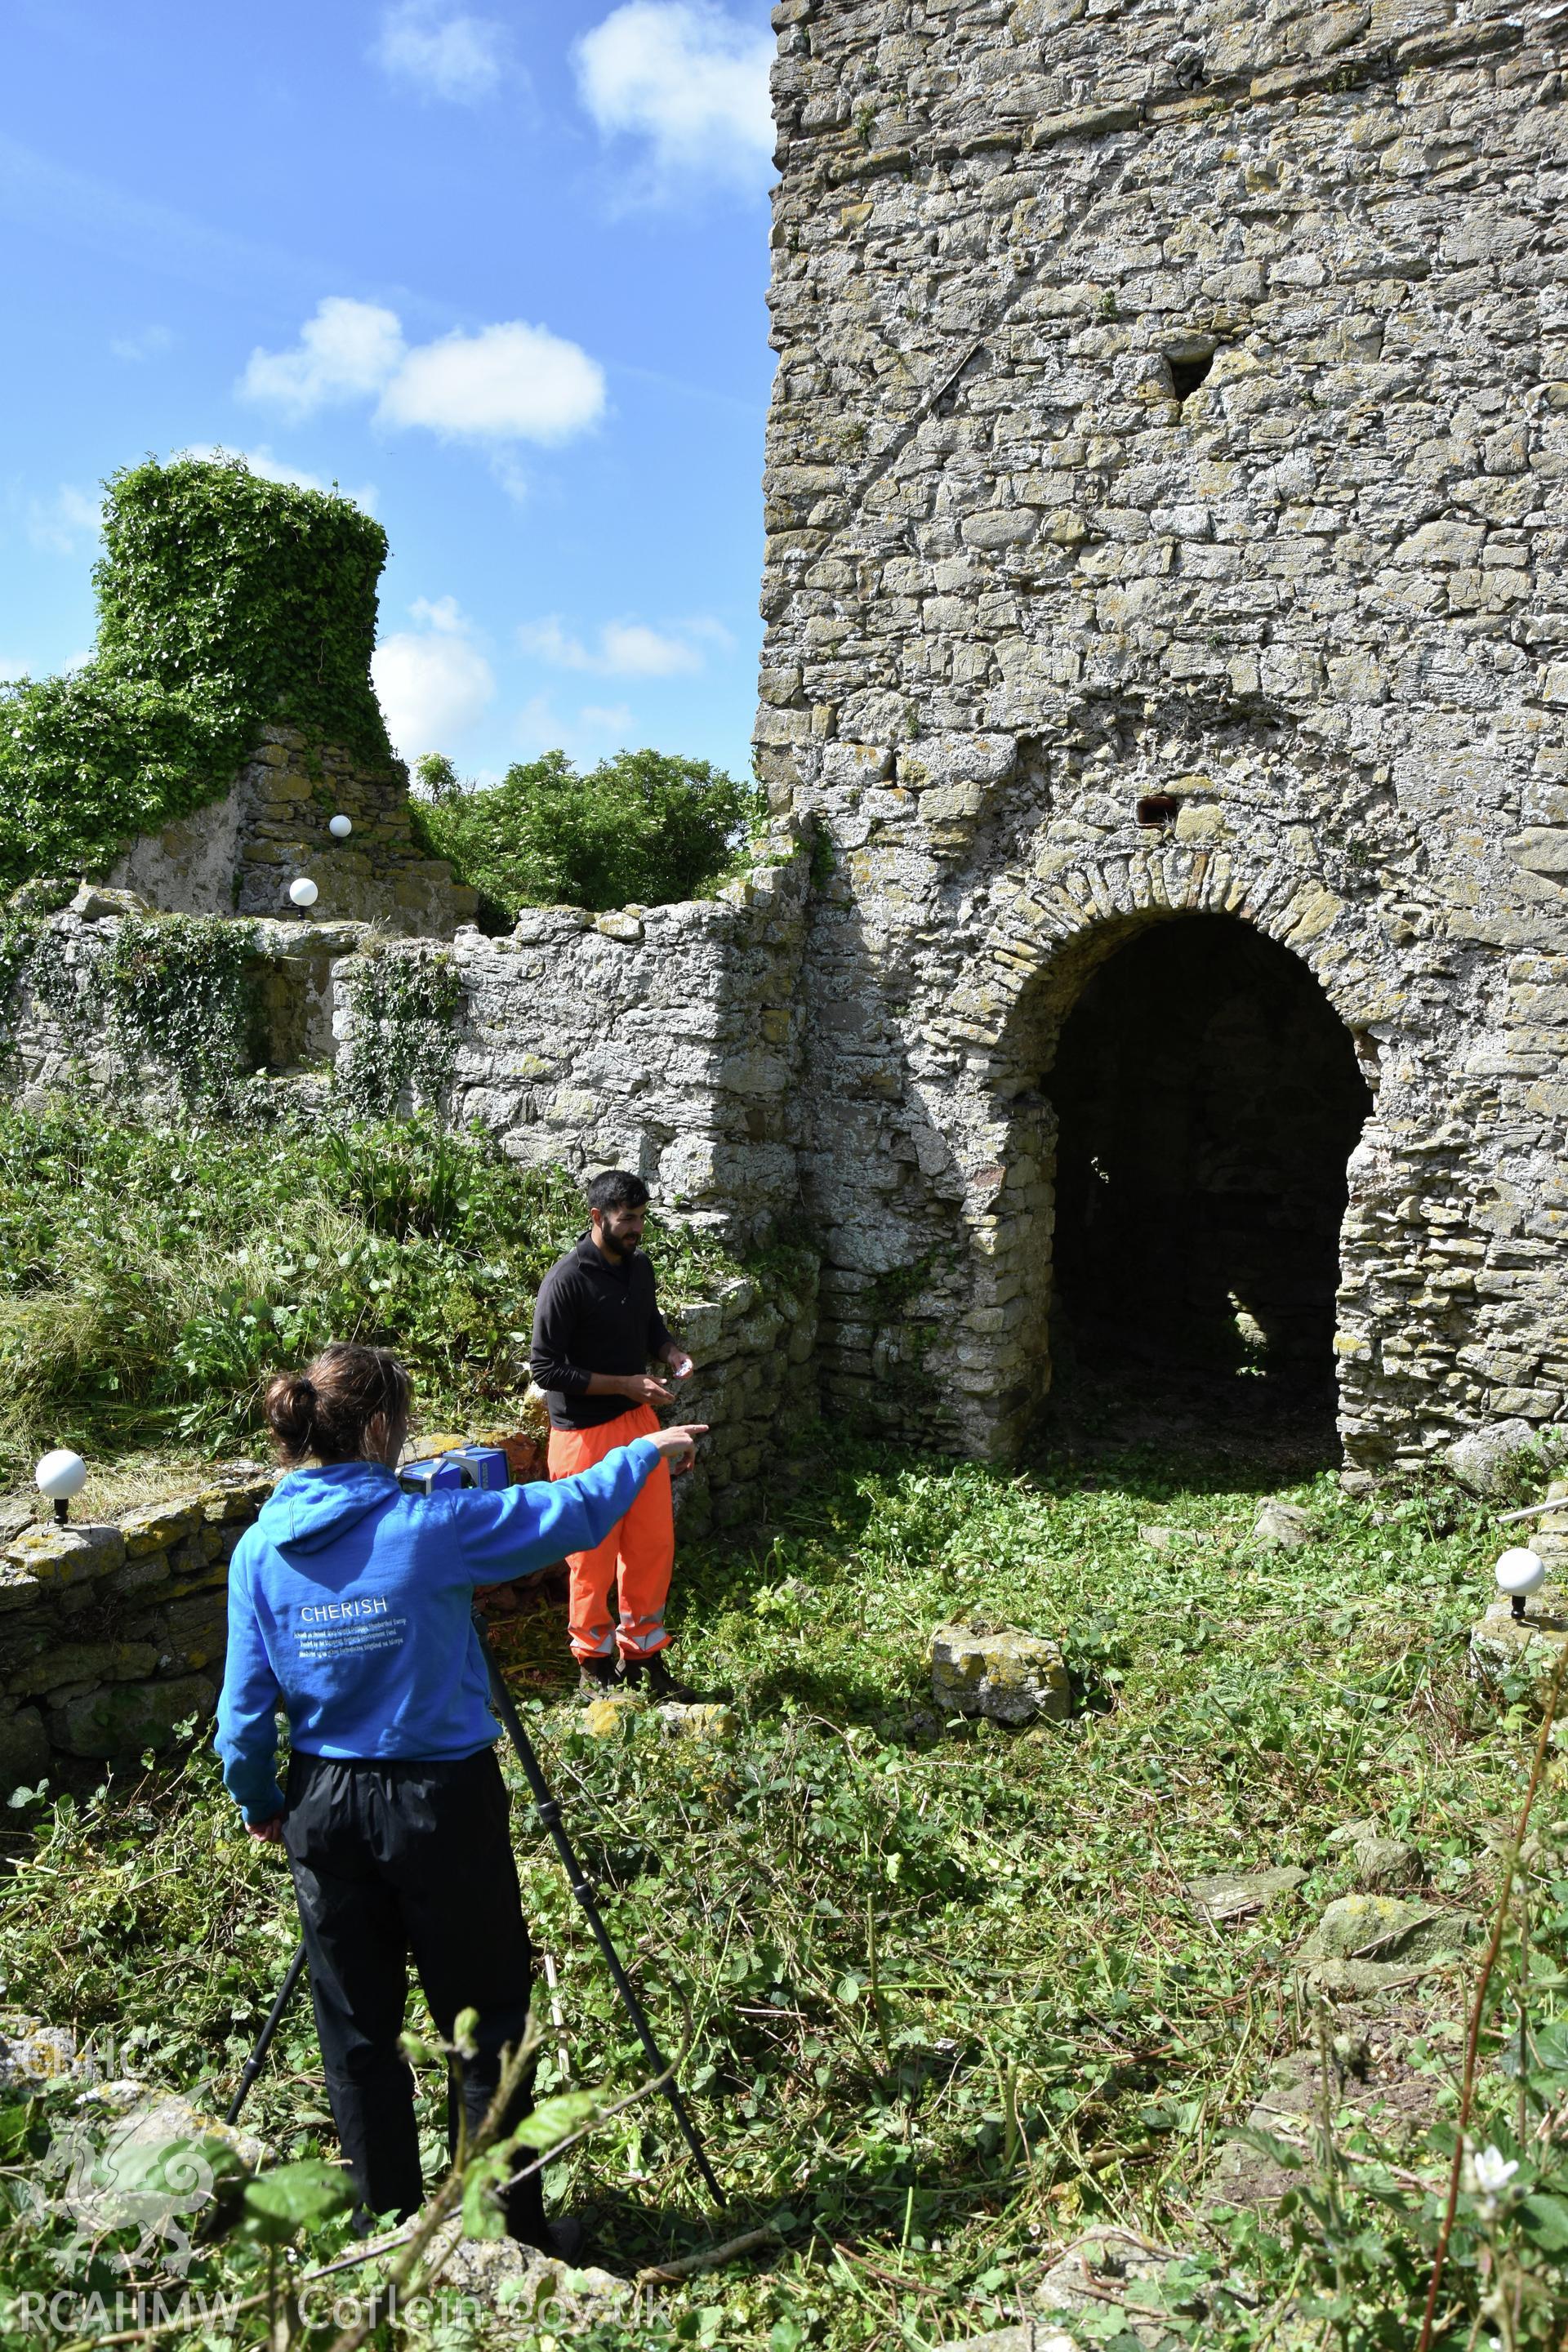 Investigator's photographic survey of the church on Puffin Island or Ynys Seiriol for the CHERISH Project. View showing CHERISH Project staff undertaking survey work. ? Crown: CHERISH PROJECT 2018. Produced with EU funds through the Ireland Wales Co-operation Programme 2014-2020. All material made freely available through the Open Government Licence.